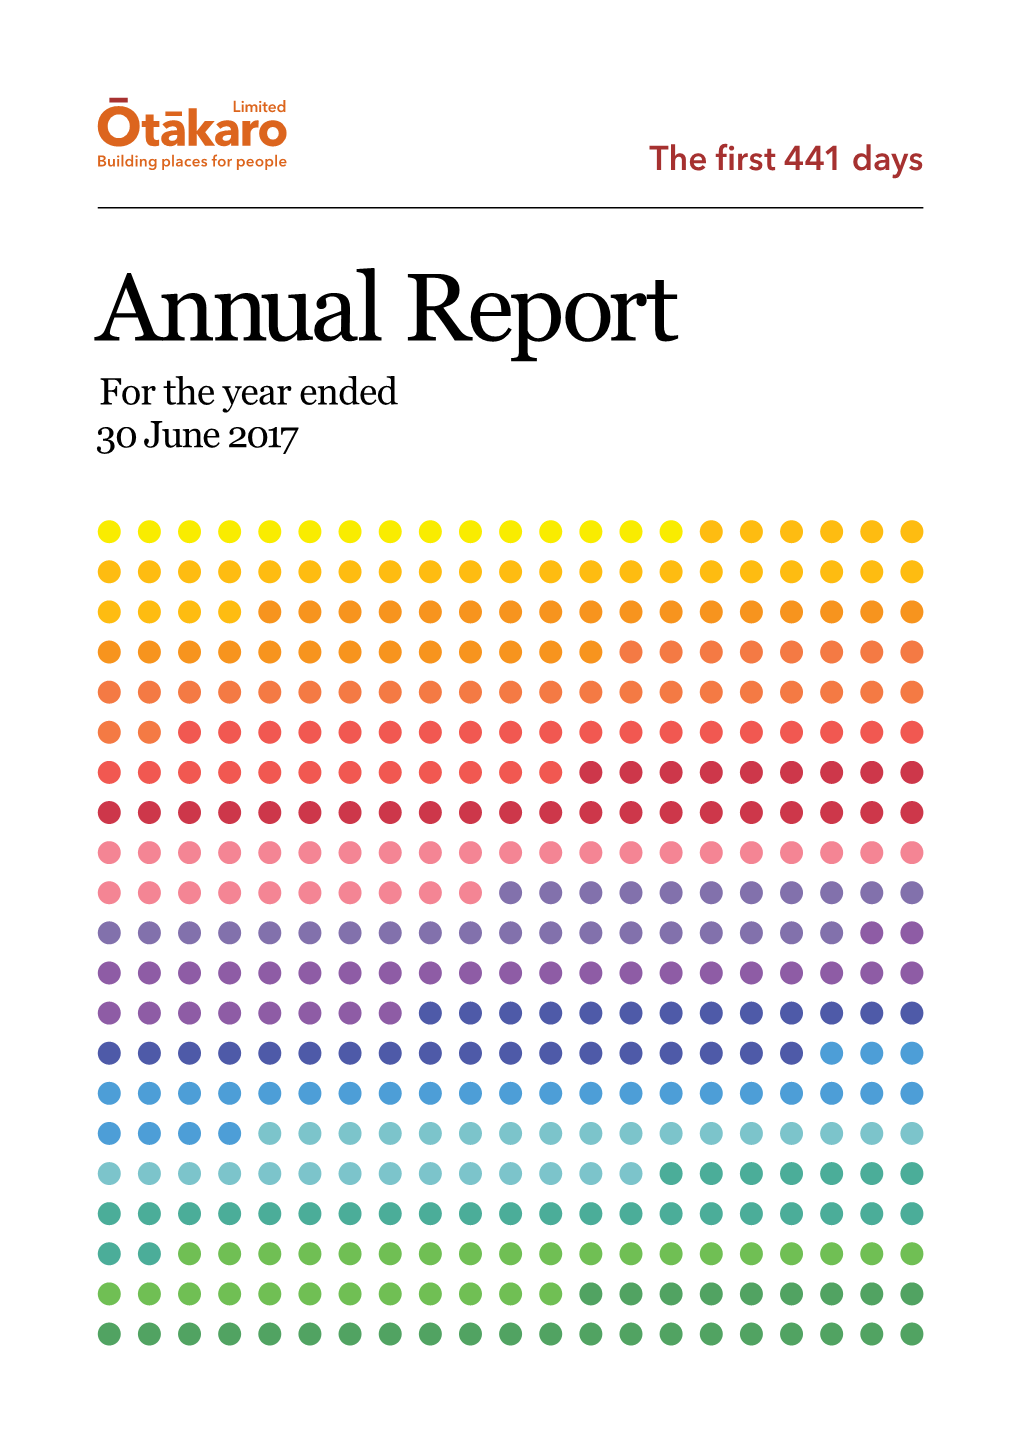 Annual Report for the Year Ended 30 June 2017 Turning Spaces Into Places for People